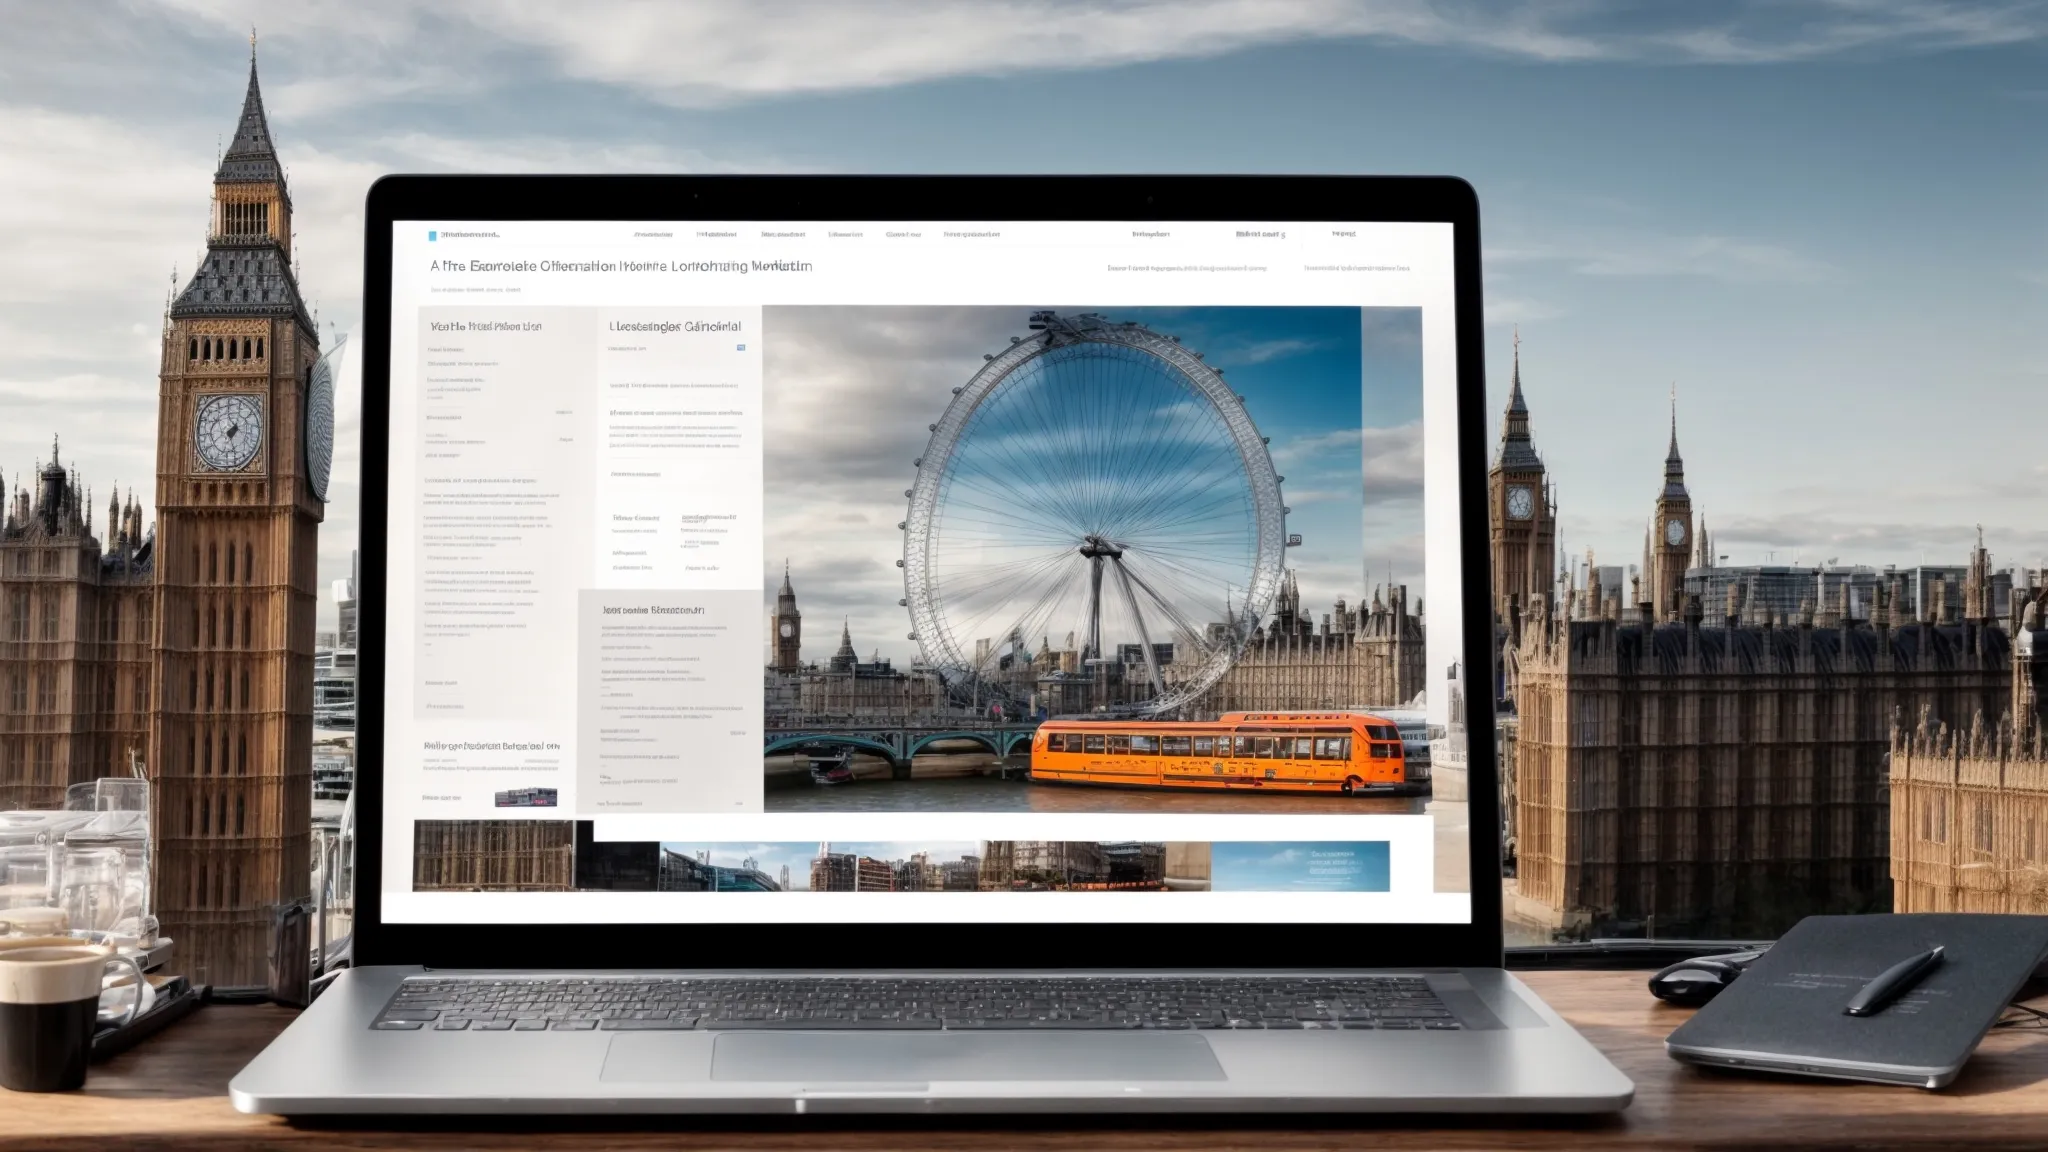 a laptop displaying graphs and charts sits on a table surrounded by iconic british landmarks like the london eye and big ben, encapsulating the essence of top uk marketing blogs focused on seo.